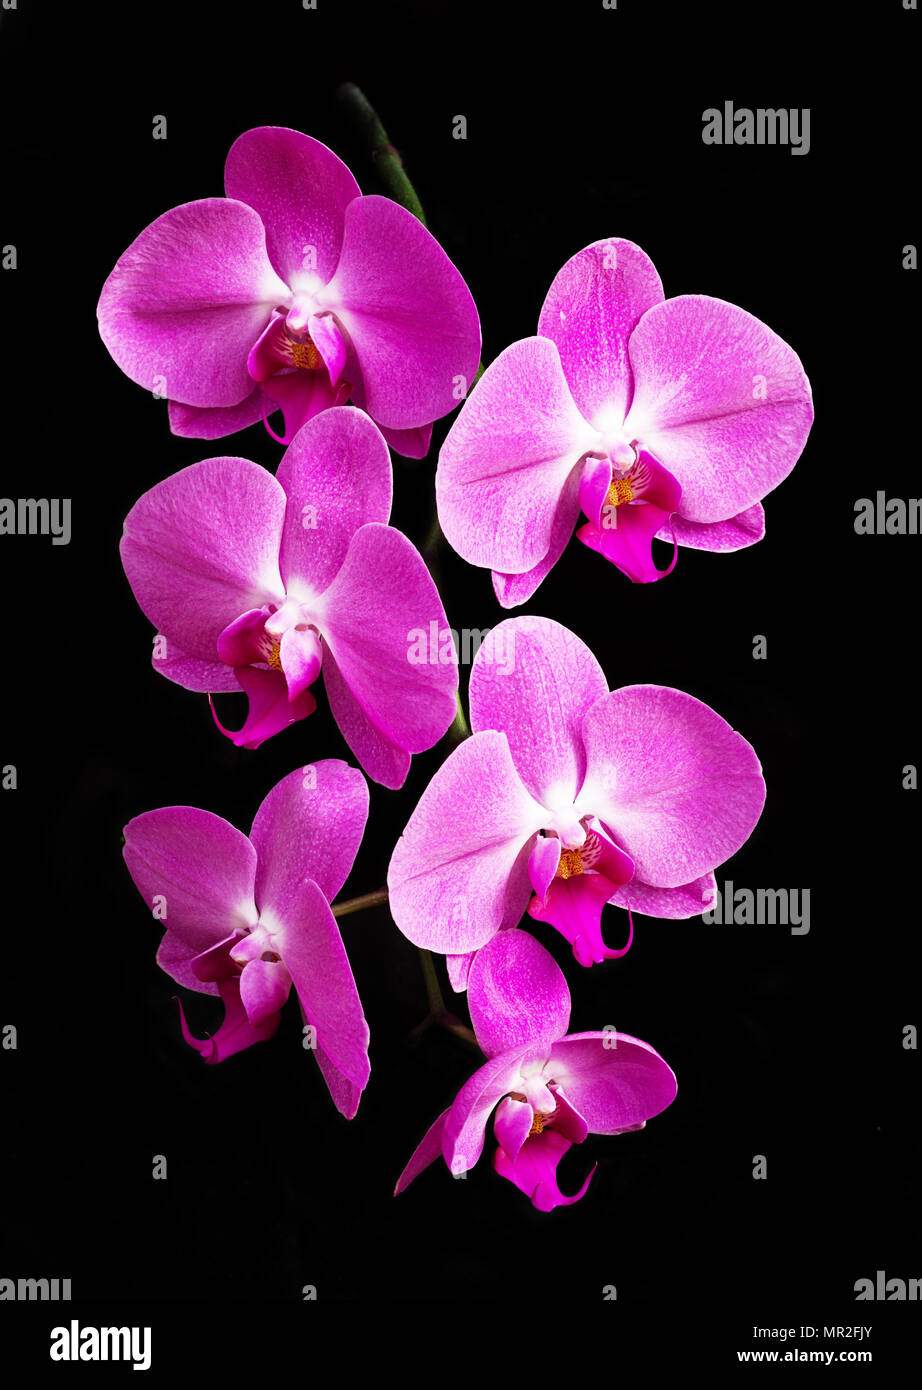 six pink phalaenopsis orchid flowers with black background Stock Photo